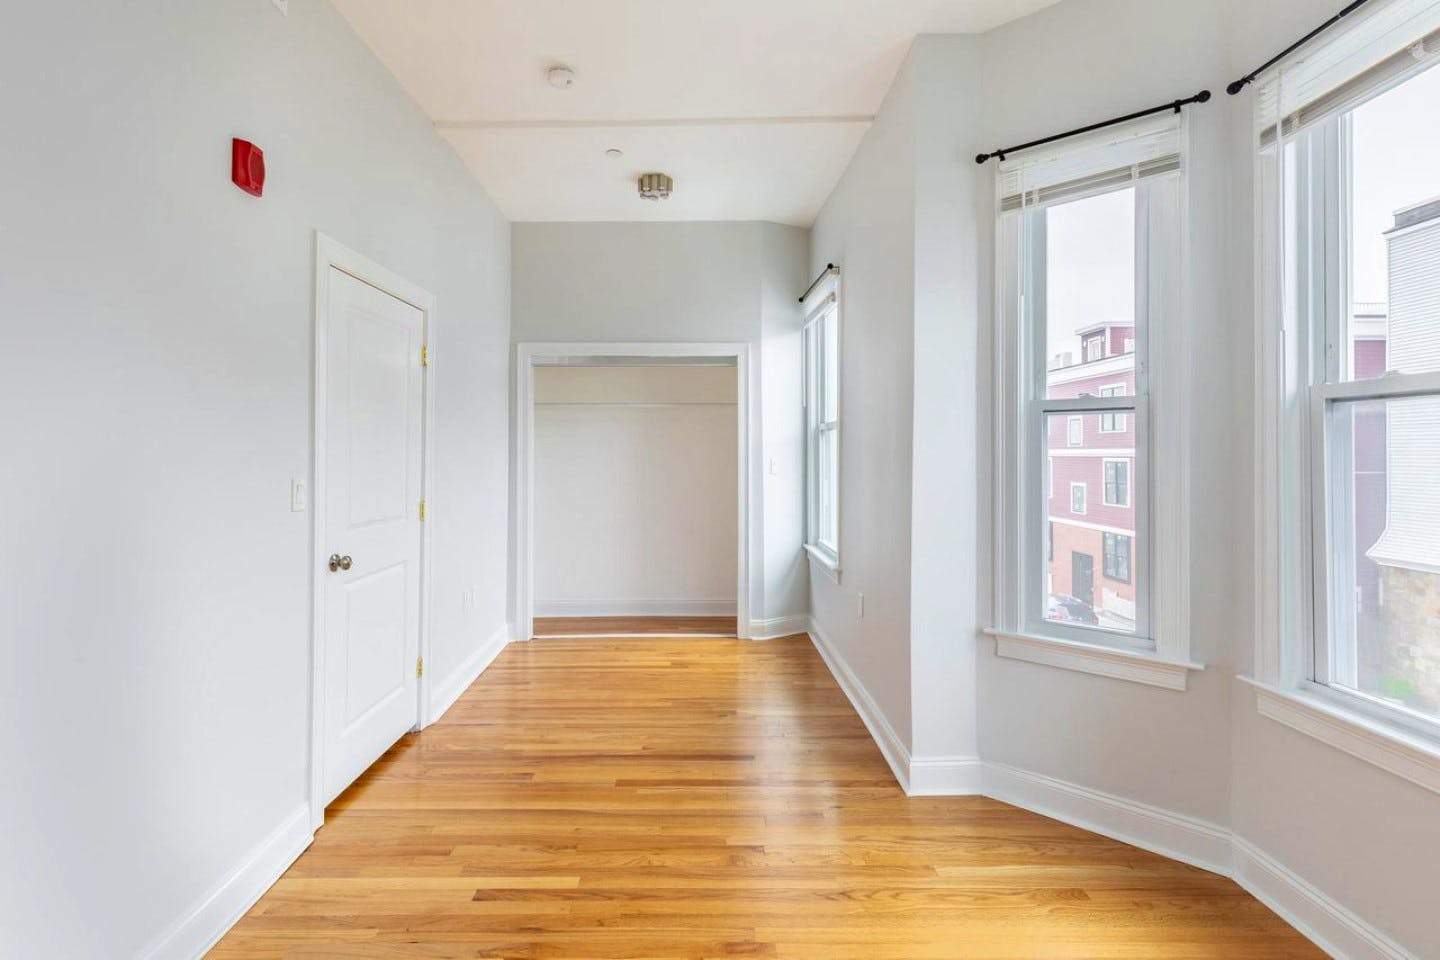 Newly Renovated Apt. with City Views 1 block away from Putnam Square Park